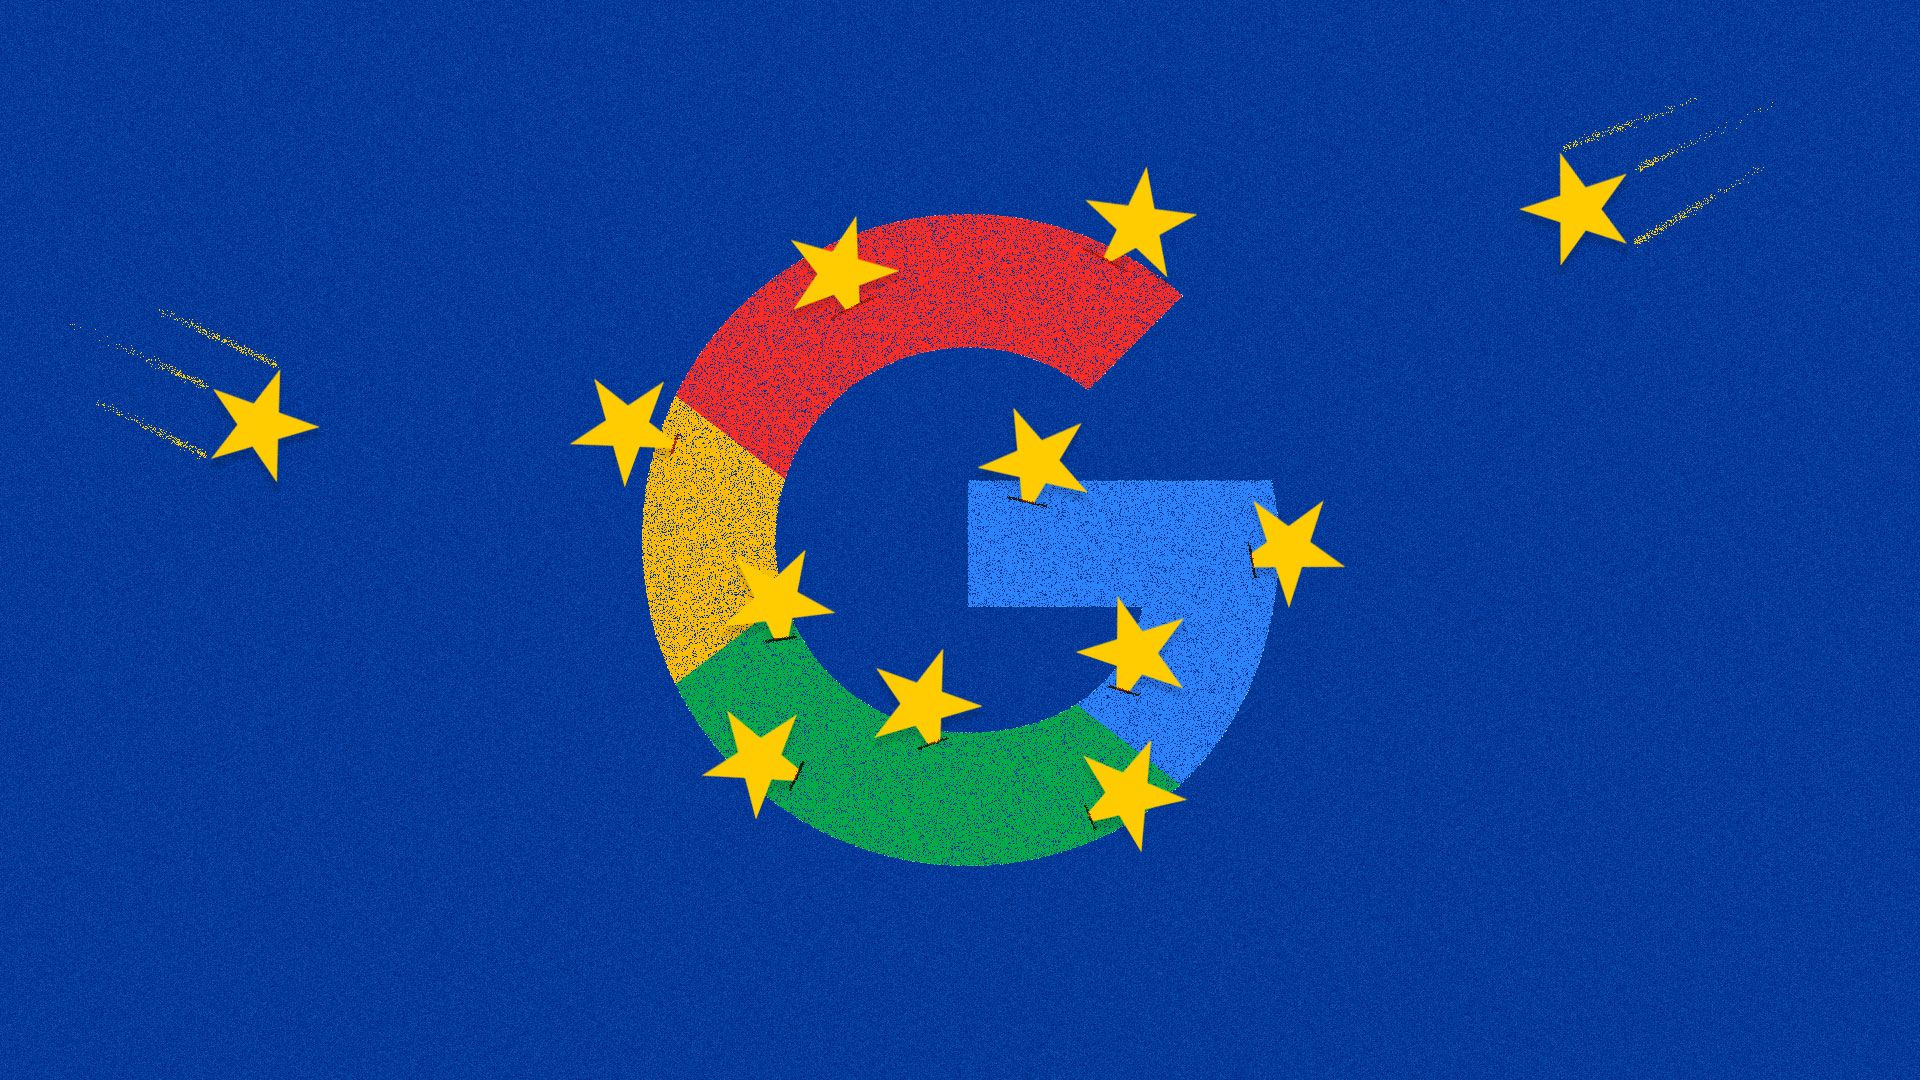 The Google G logo being attacked by the stars in the European Union flag